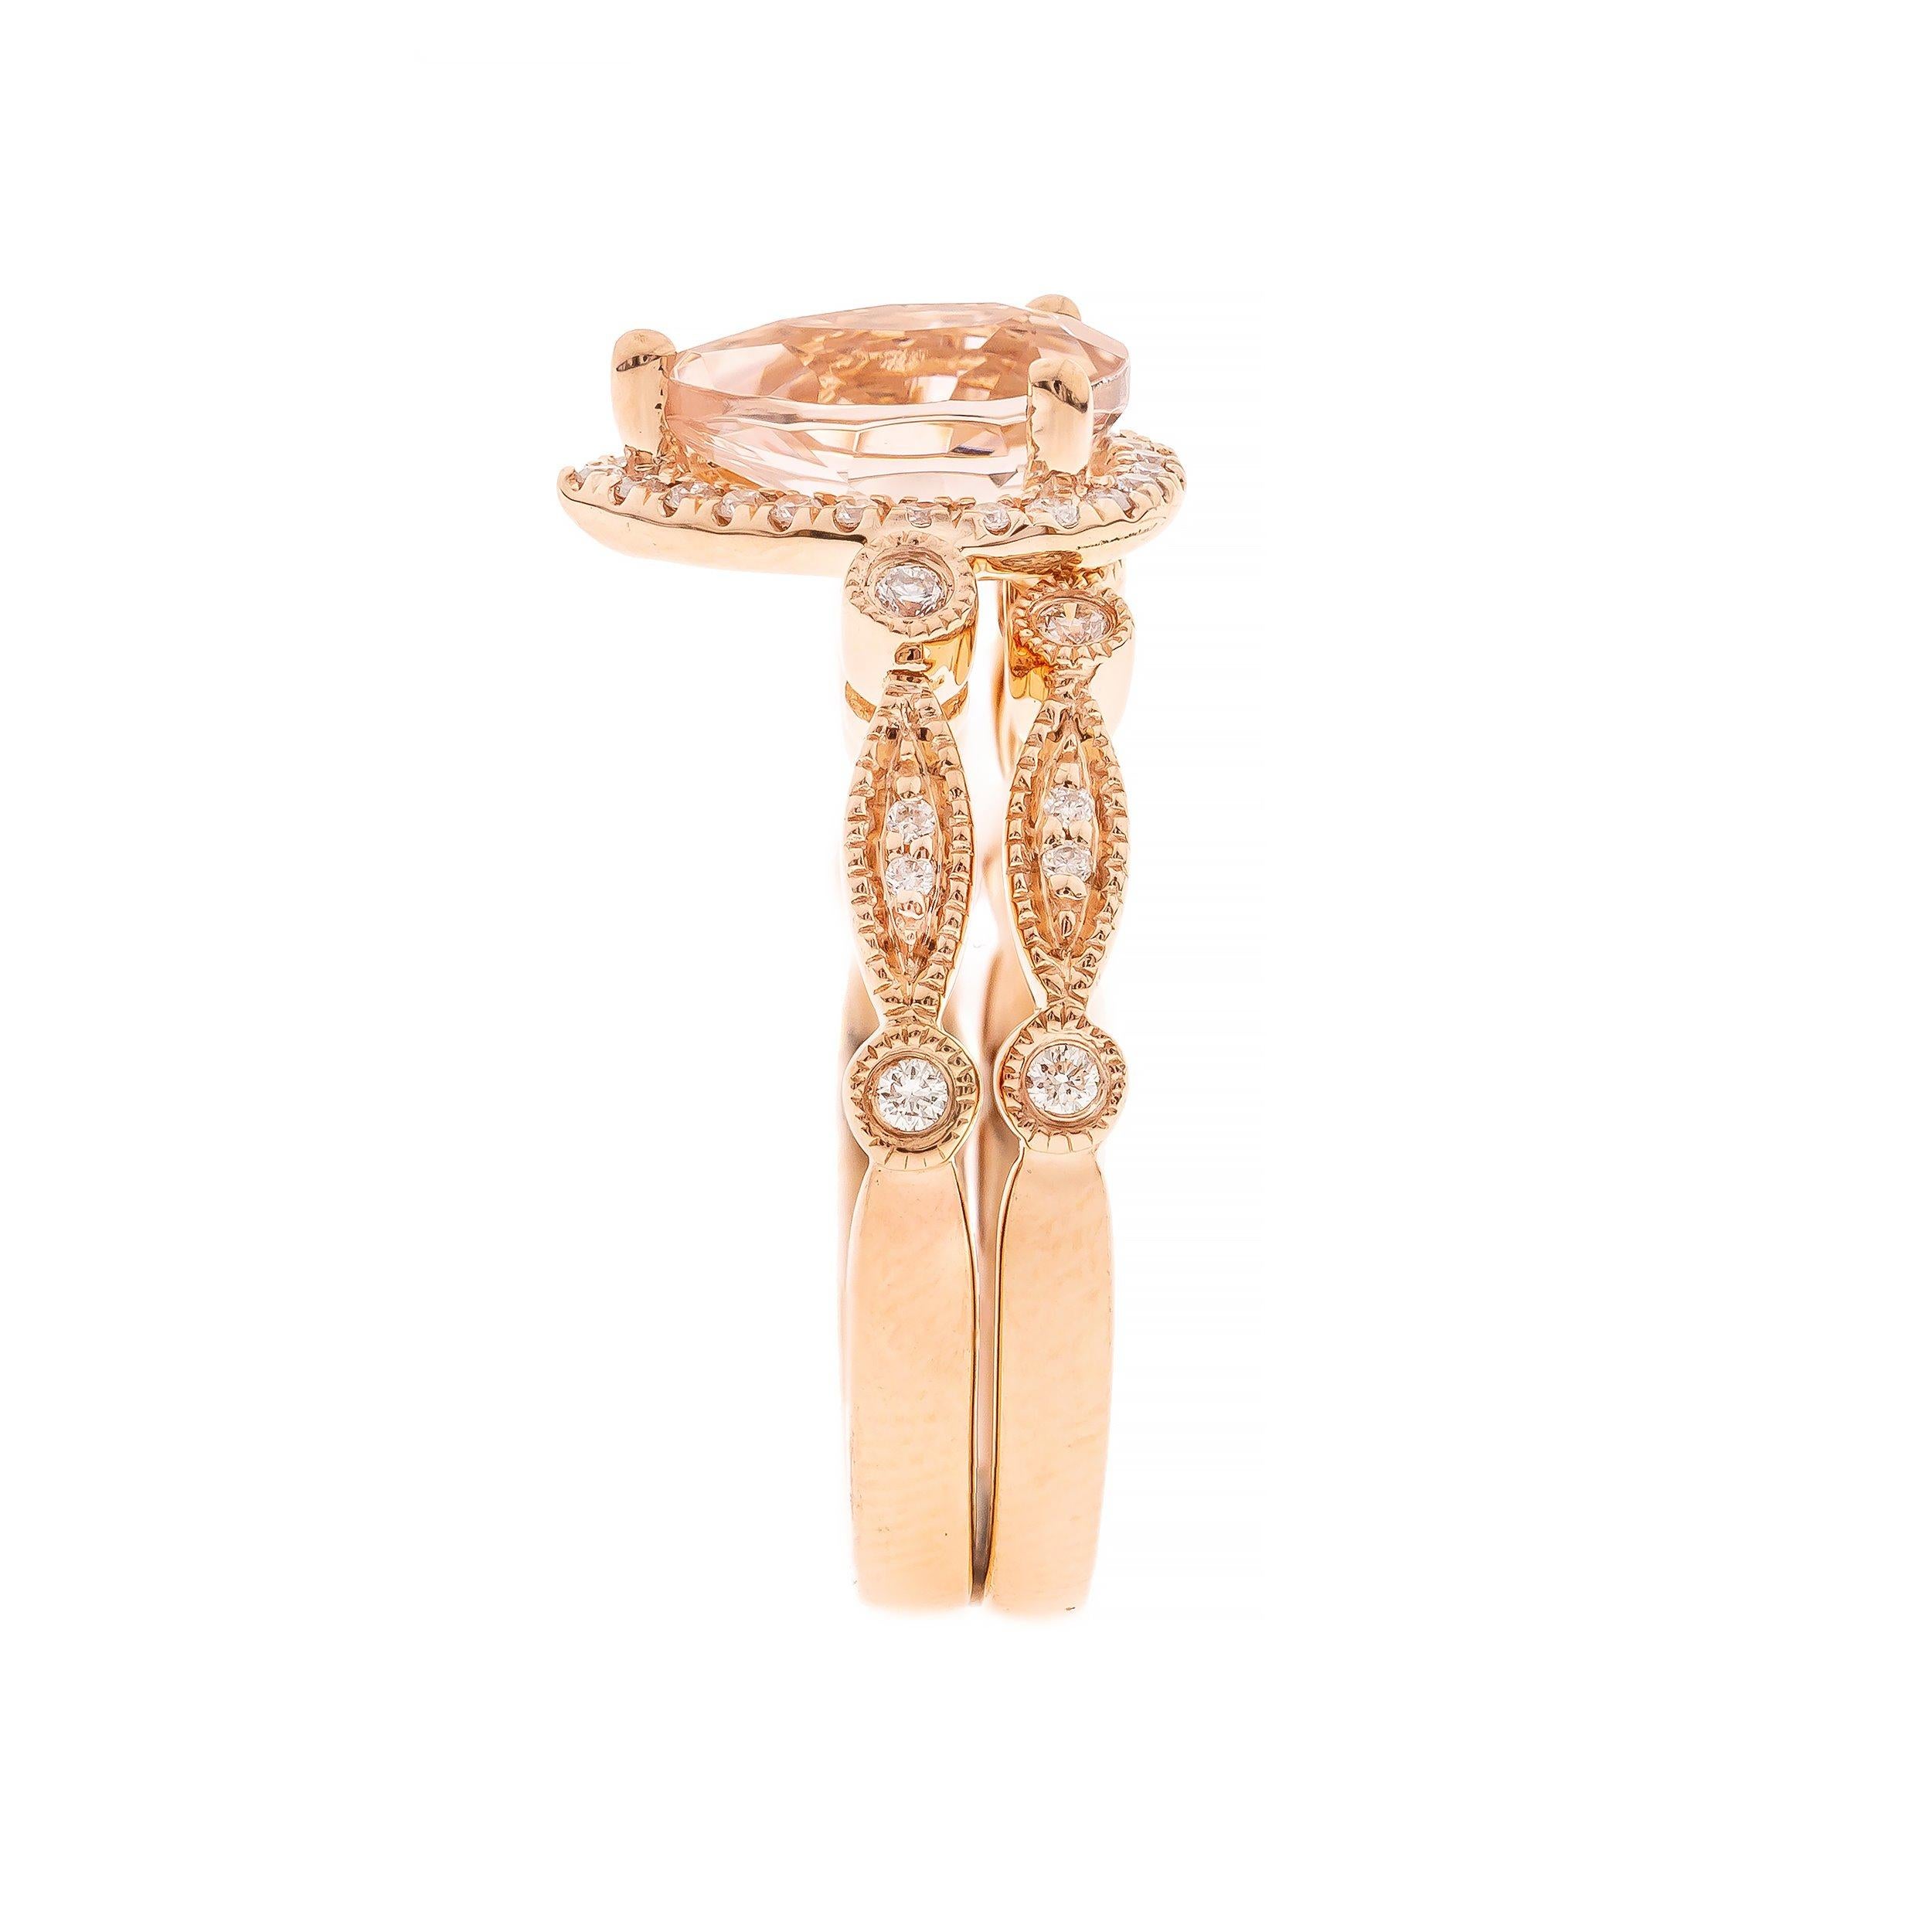 Decorate yourself in elegance with this Ring is crafted from 14-karat Rose Gold by Gin & Grace. This Ring is made up of 8x6 mm Pear-Cut (1 pcs) 0.85 carat Morganite and Round-cut White Diamond (41 Pcs) 0.17 Carat. This Ring is weight 4.63 grams.